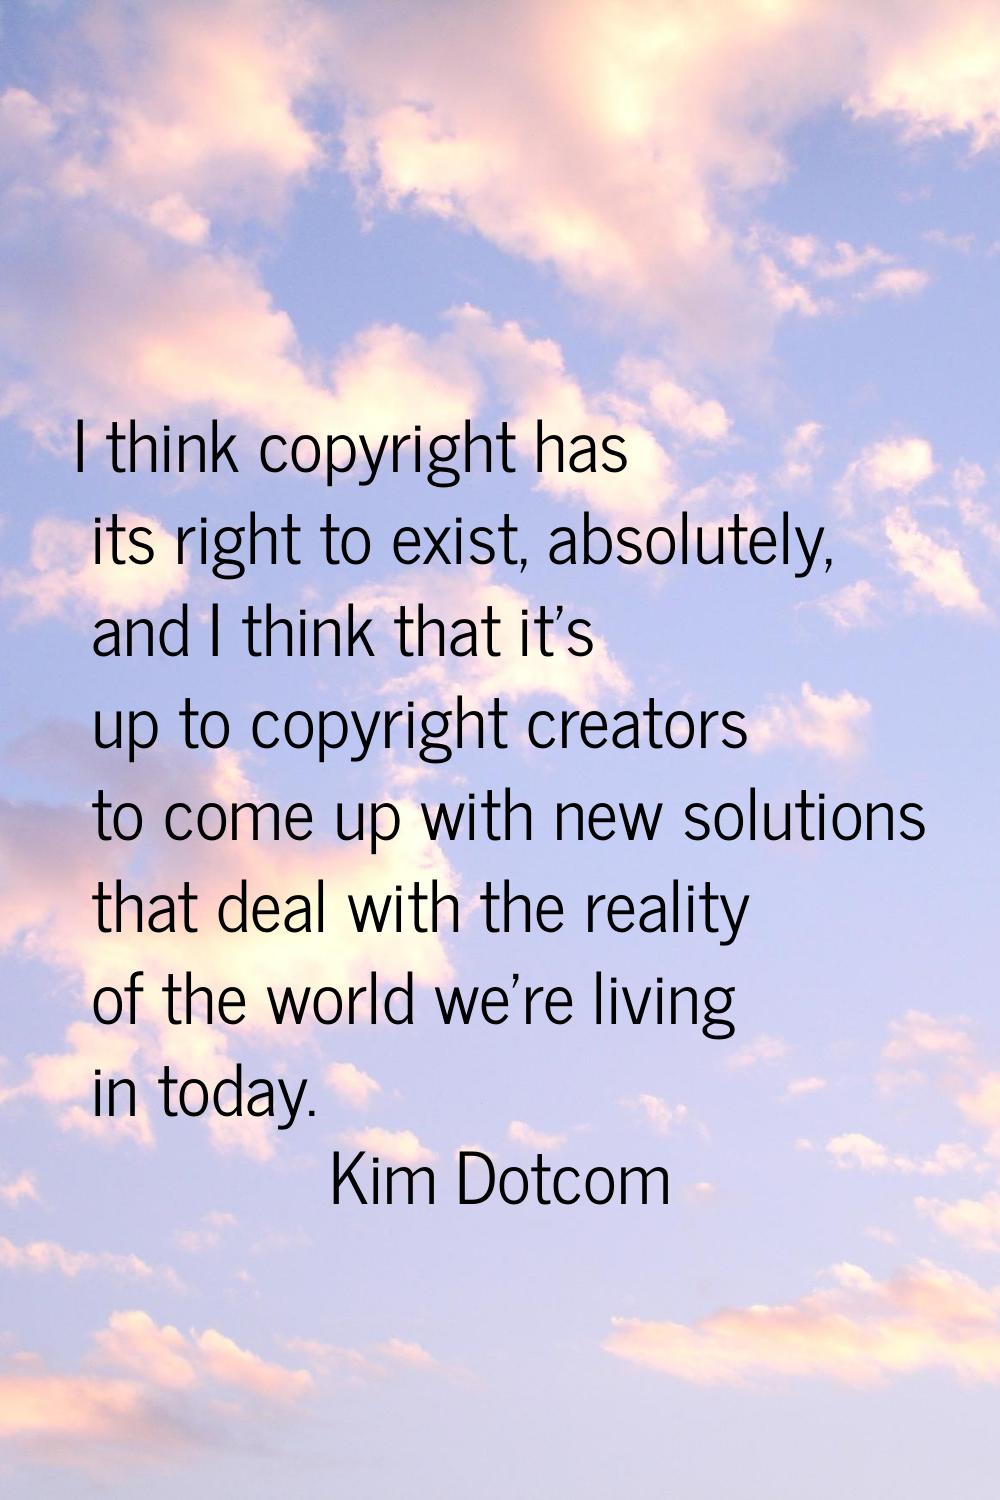 I think copyright has its right to exist, absolutely, and I think that it's up to copyright creator